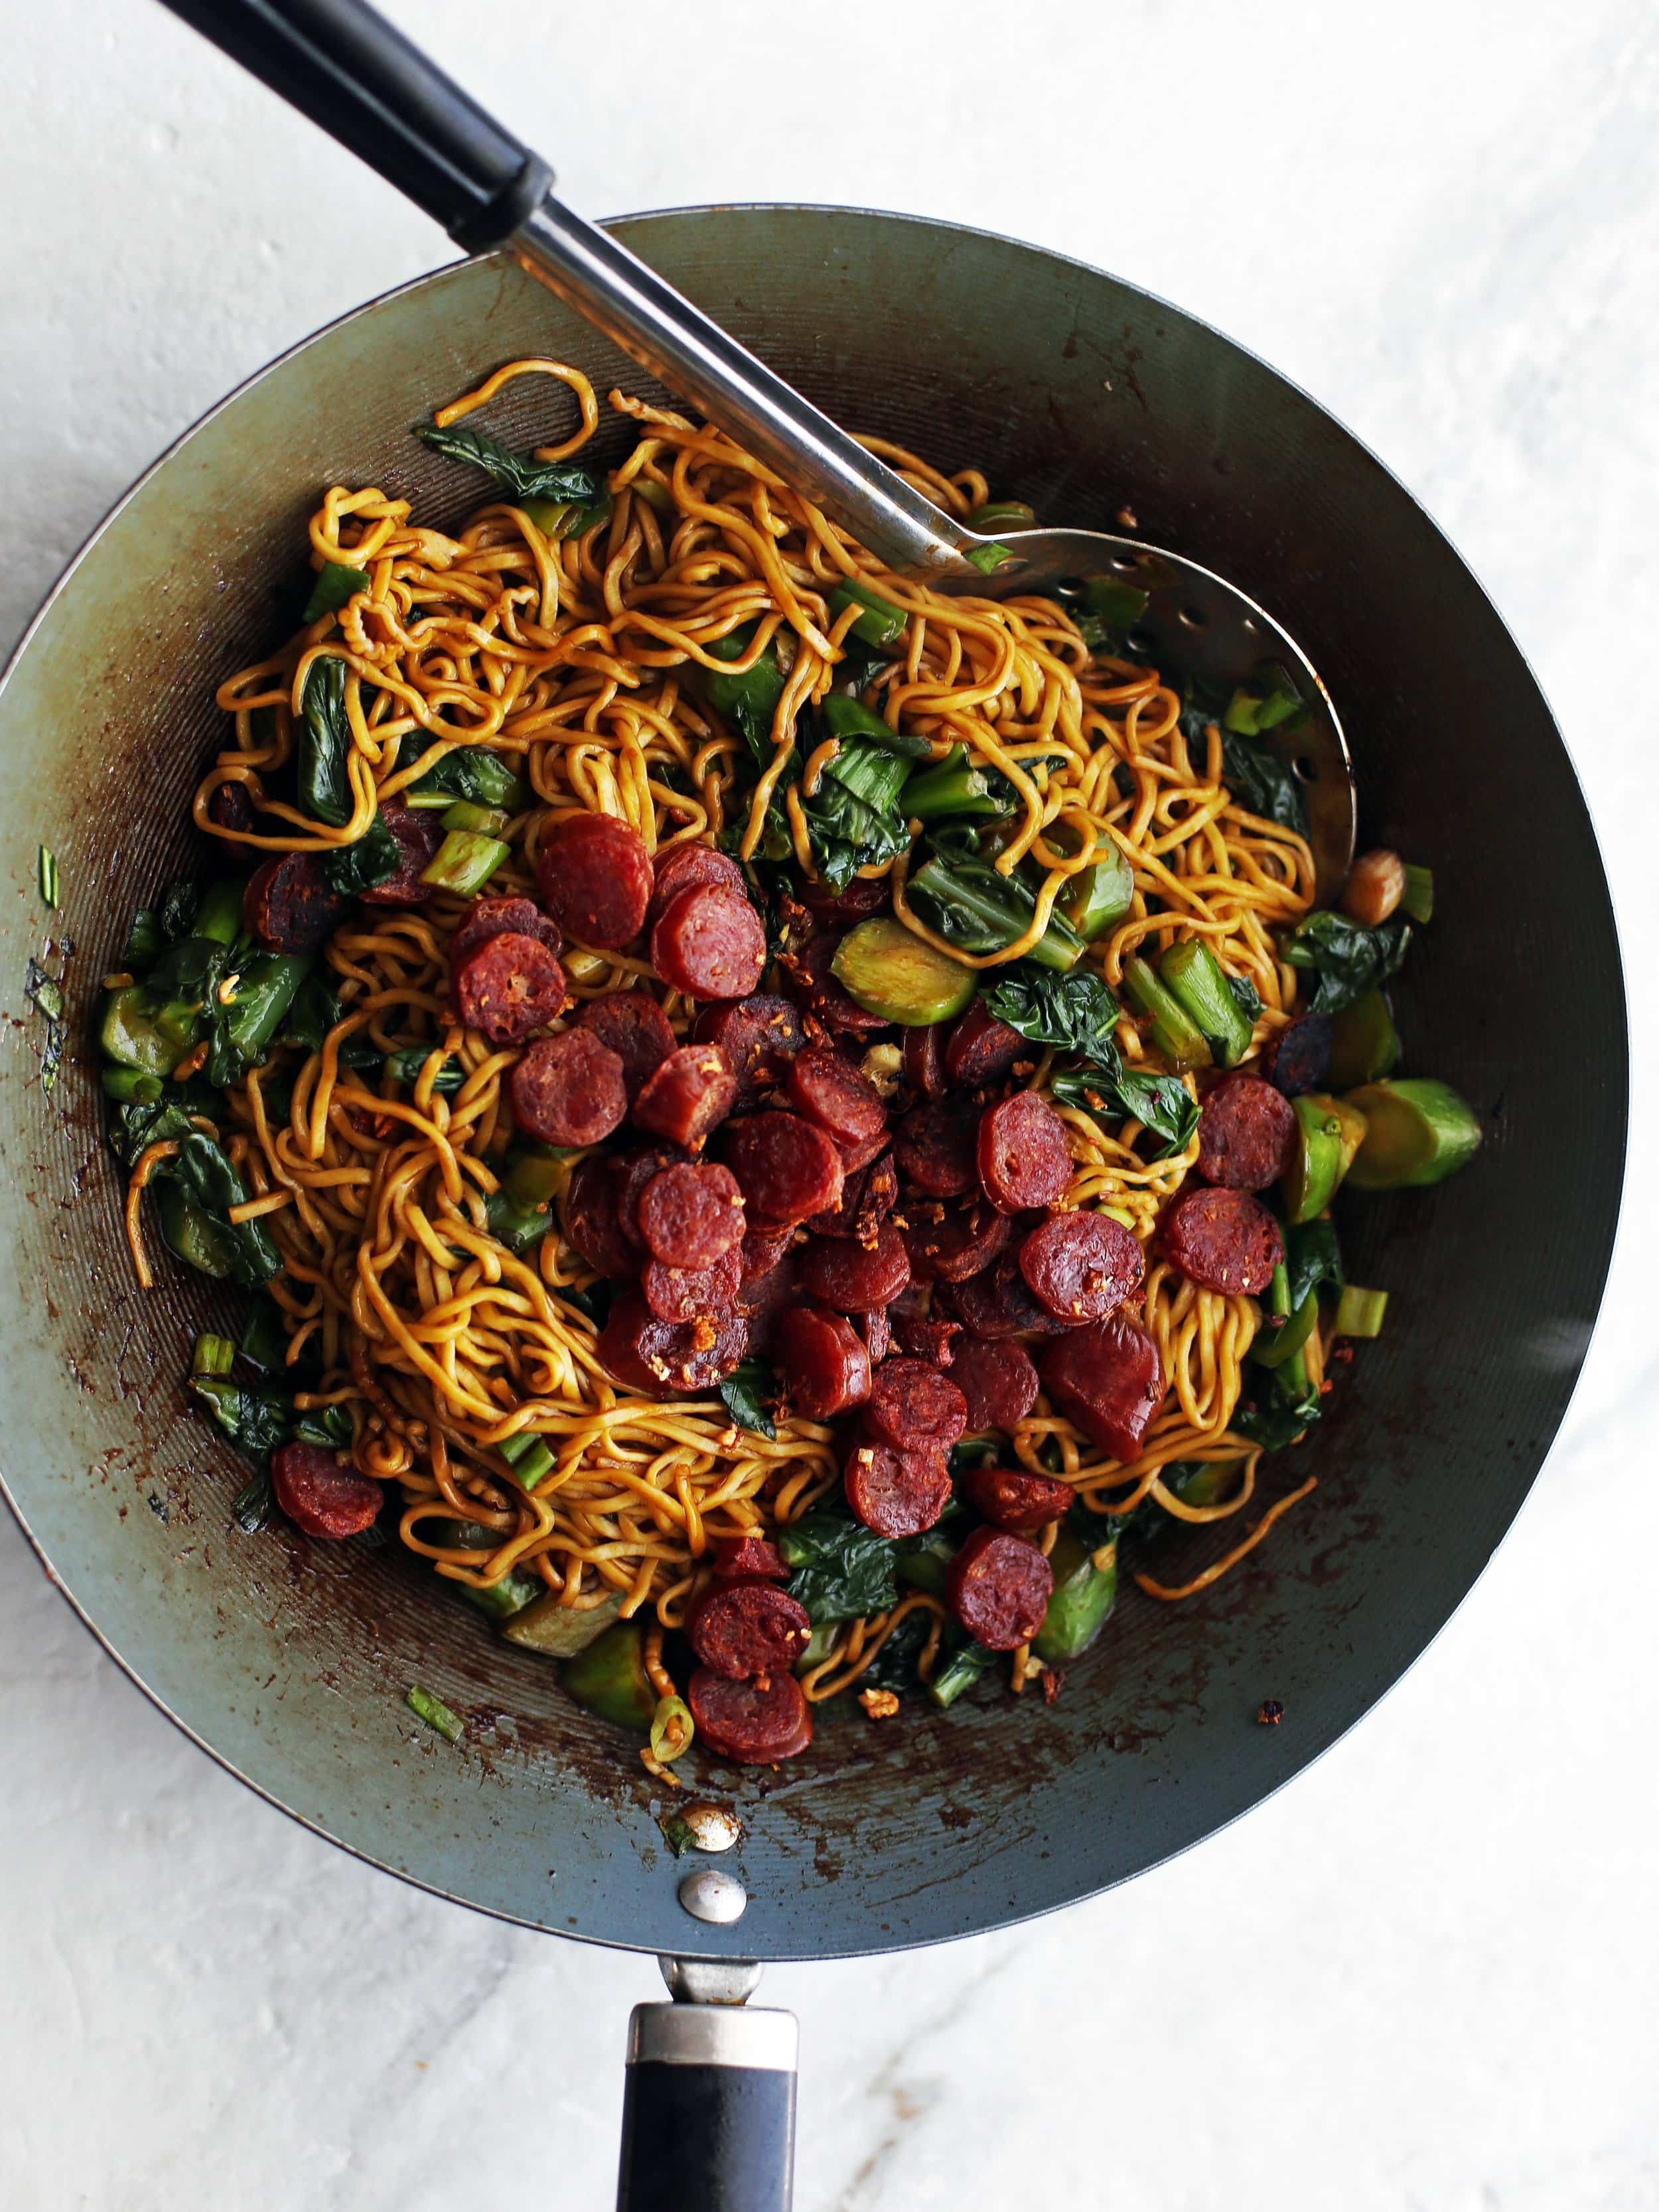 Lo mein noodles with Chinese sausage (lap cheong) and gai lan (Chinese broccoli) in a large wok.